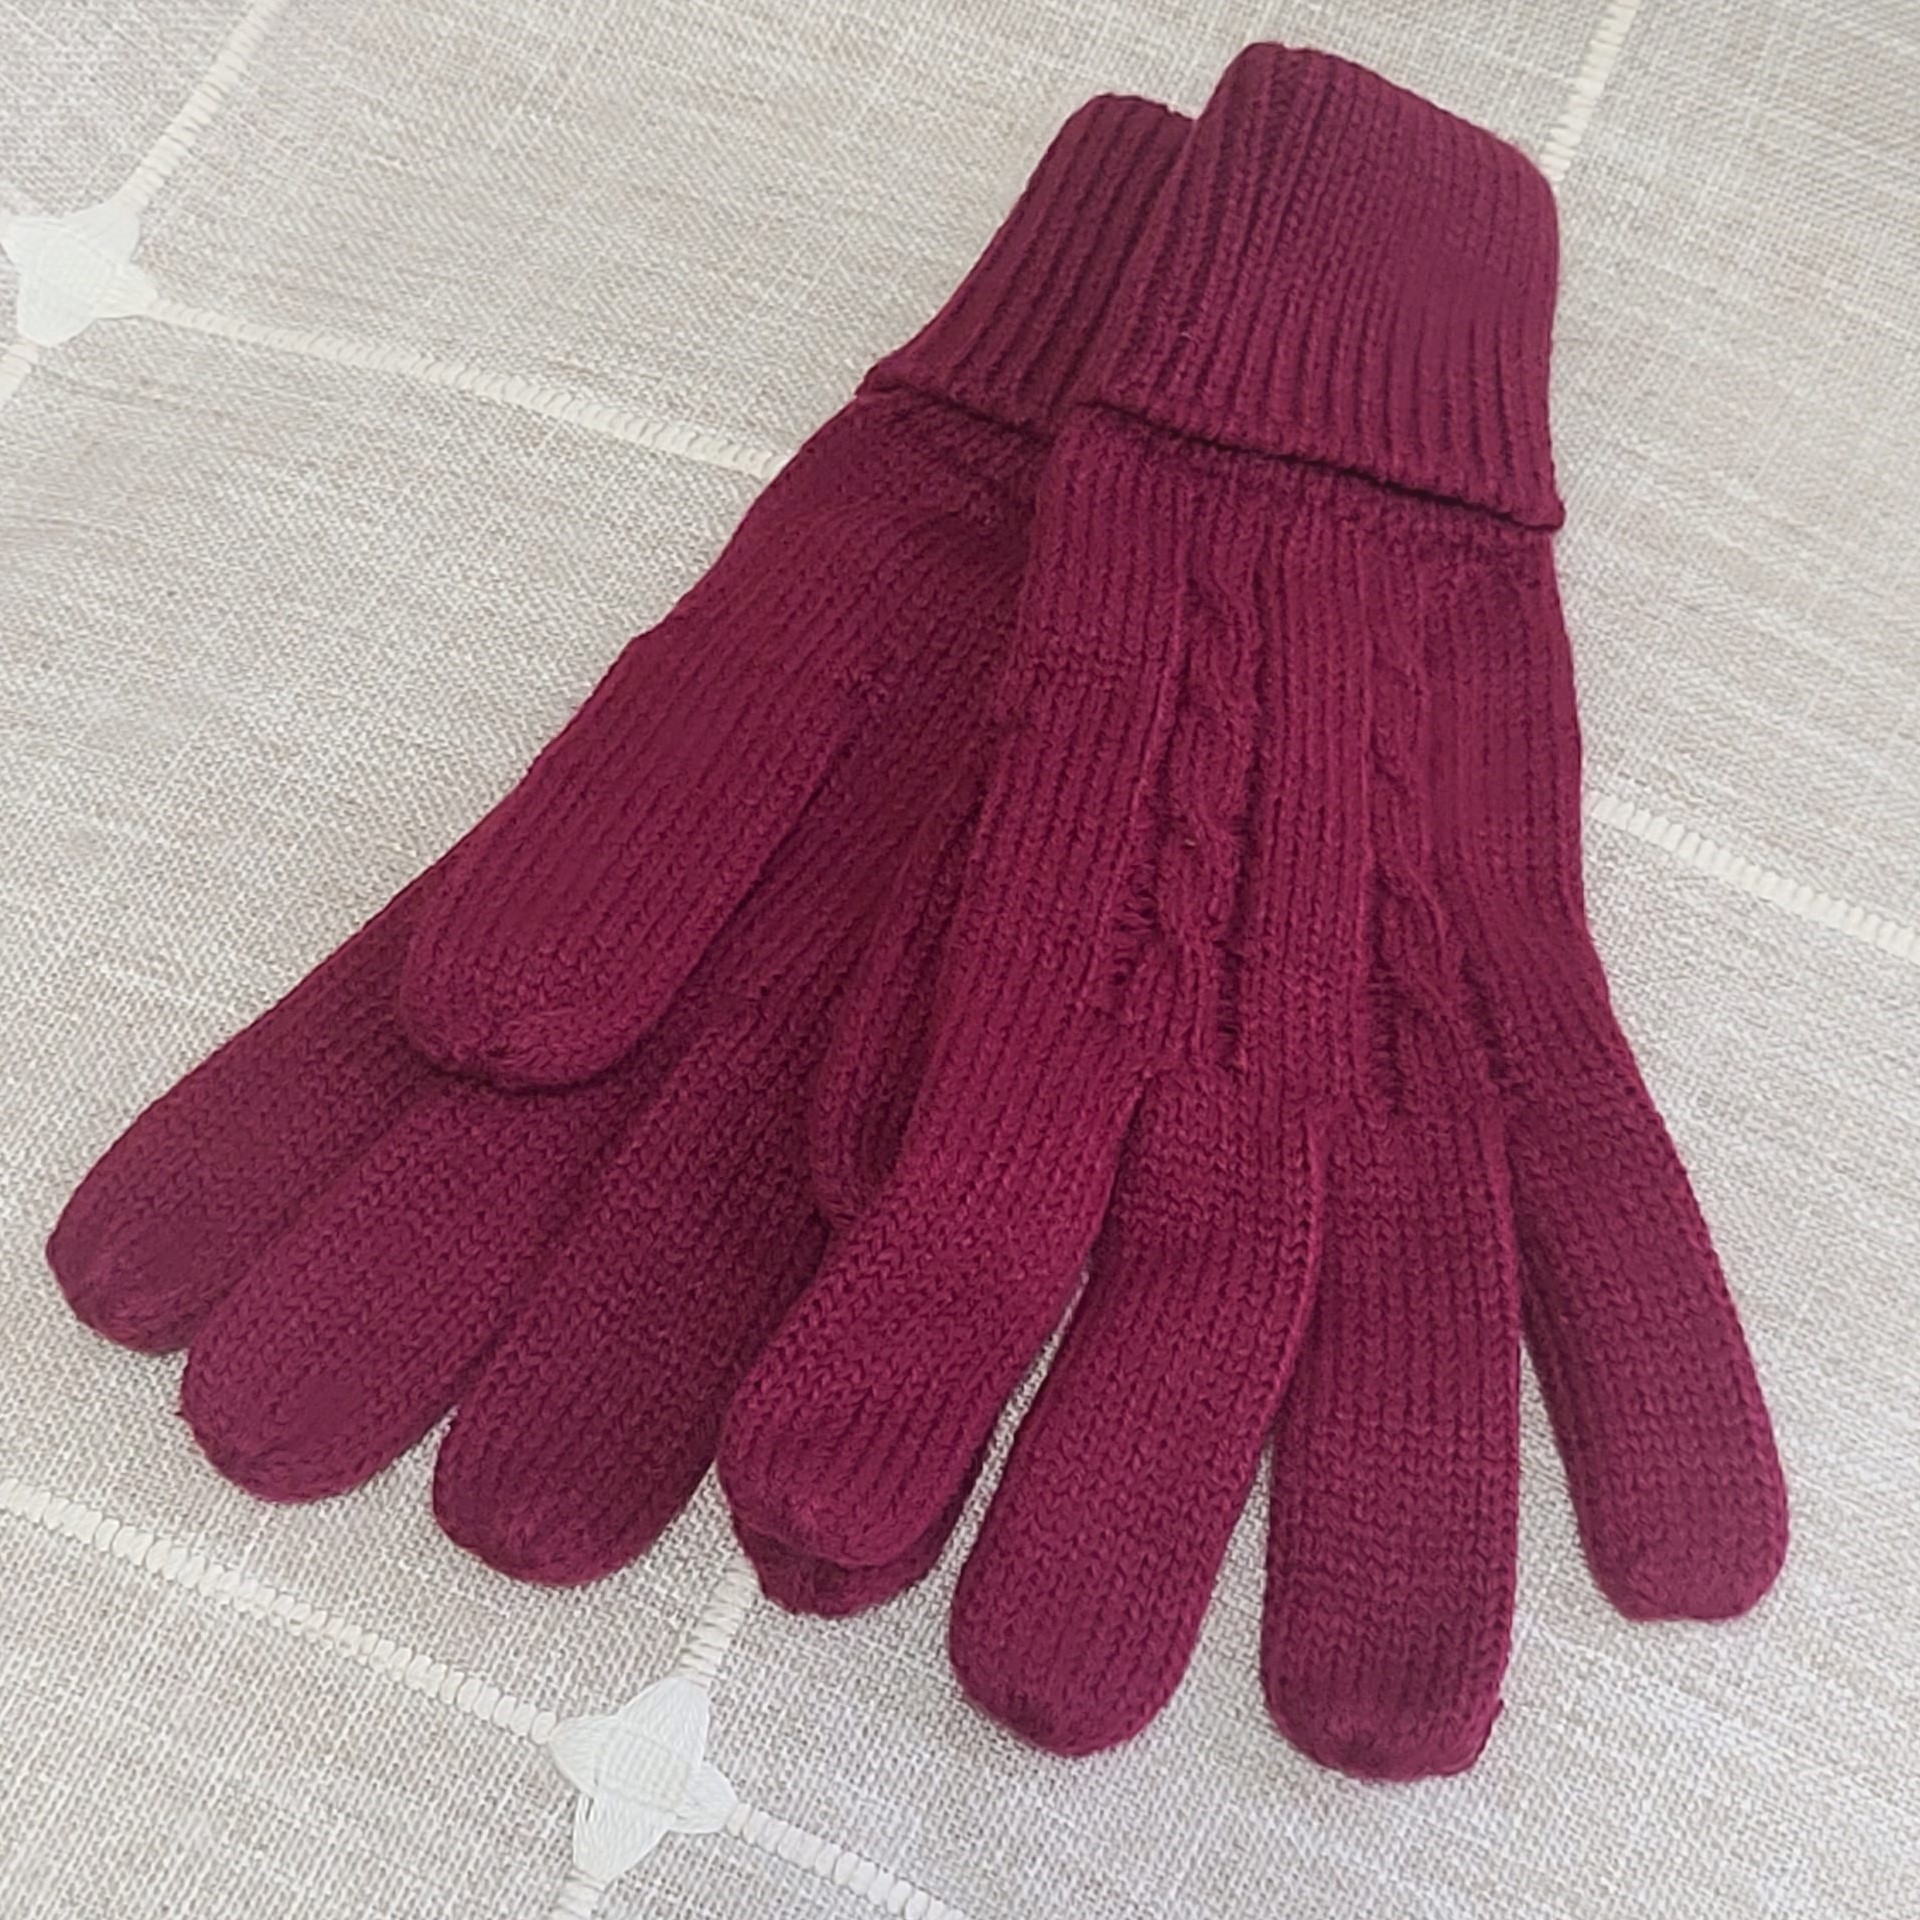 Gloves Cable Knit Design - Dark Berry